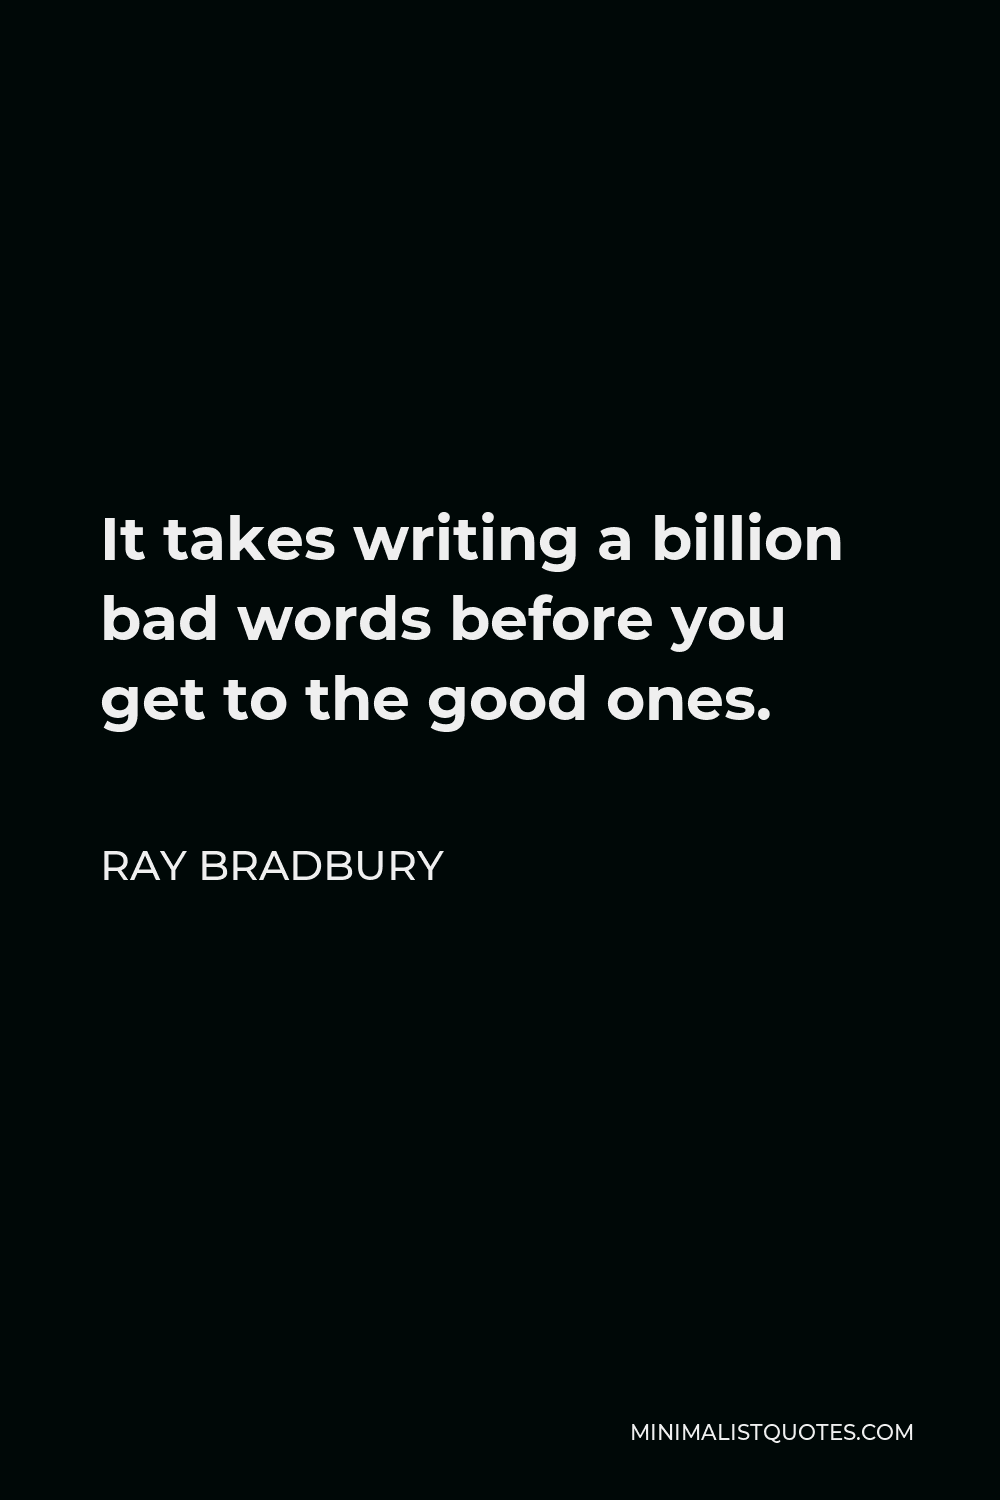 Ray Bradbury Quote - It takes writing a billion bad words before you get to the good ones.